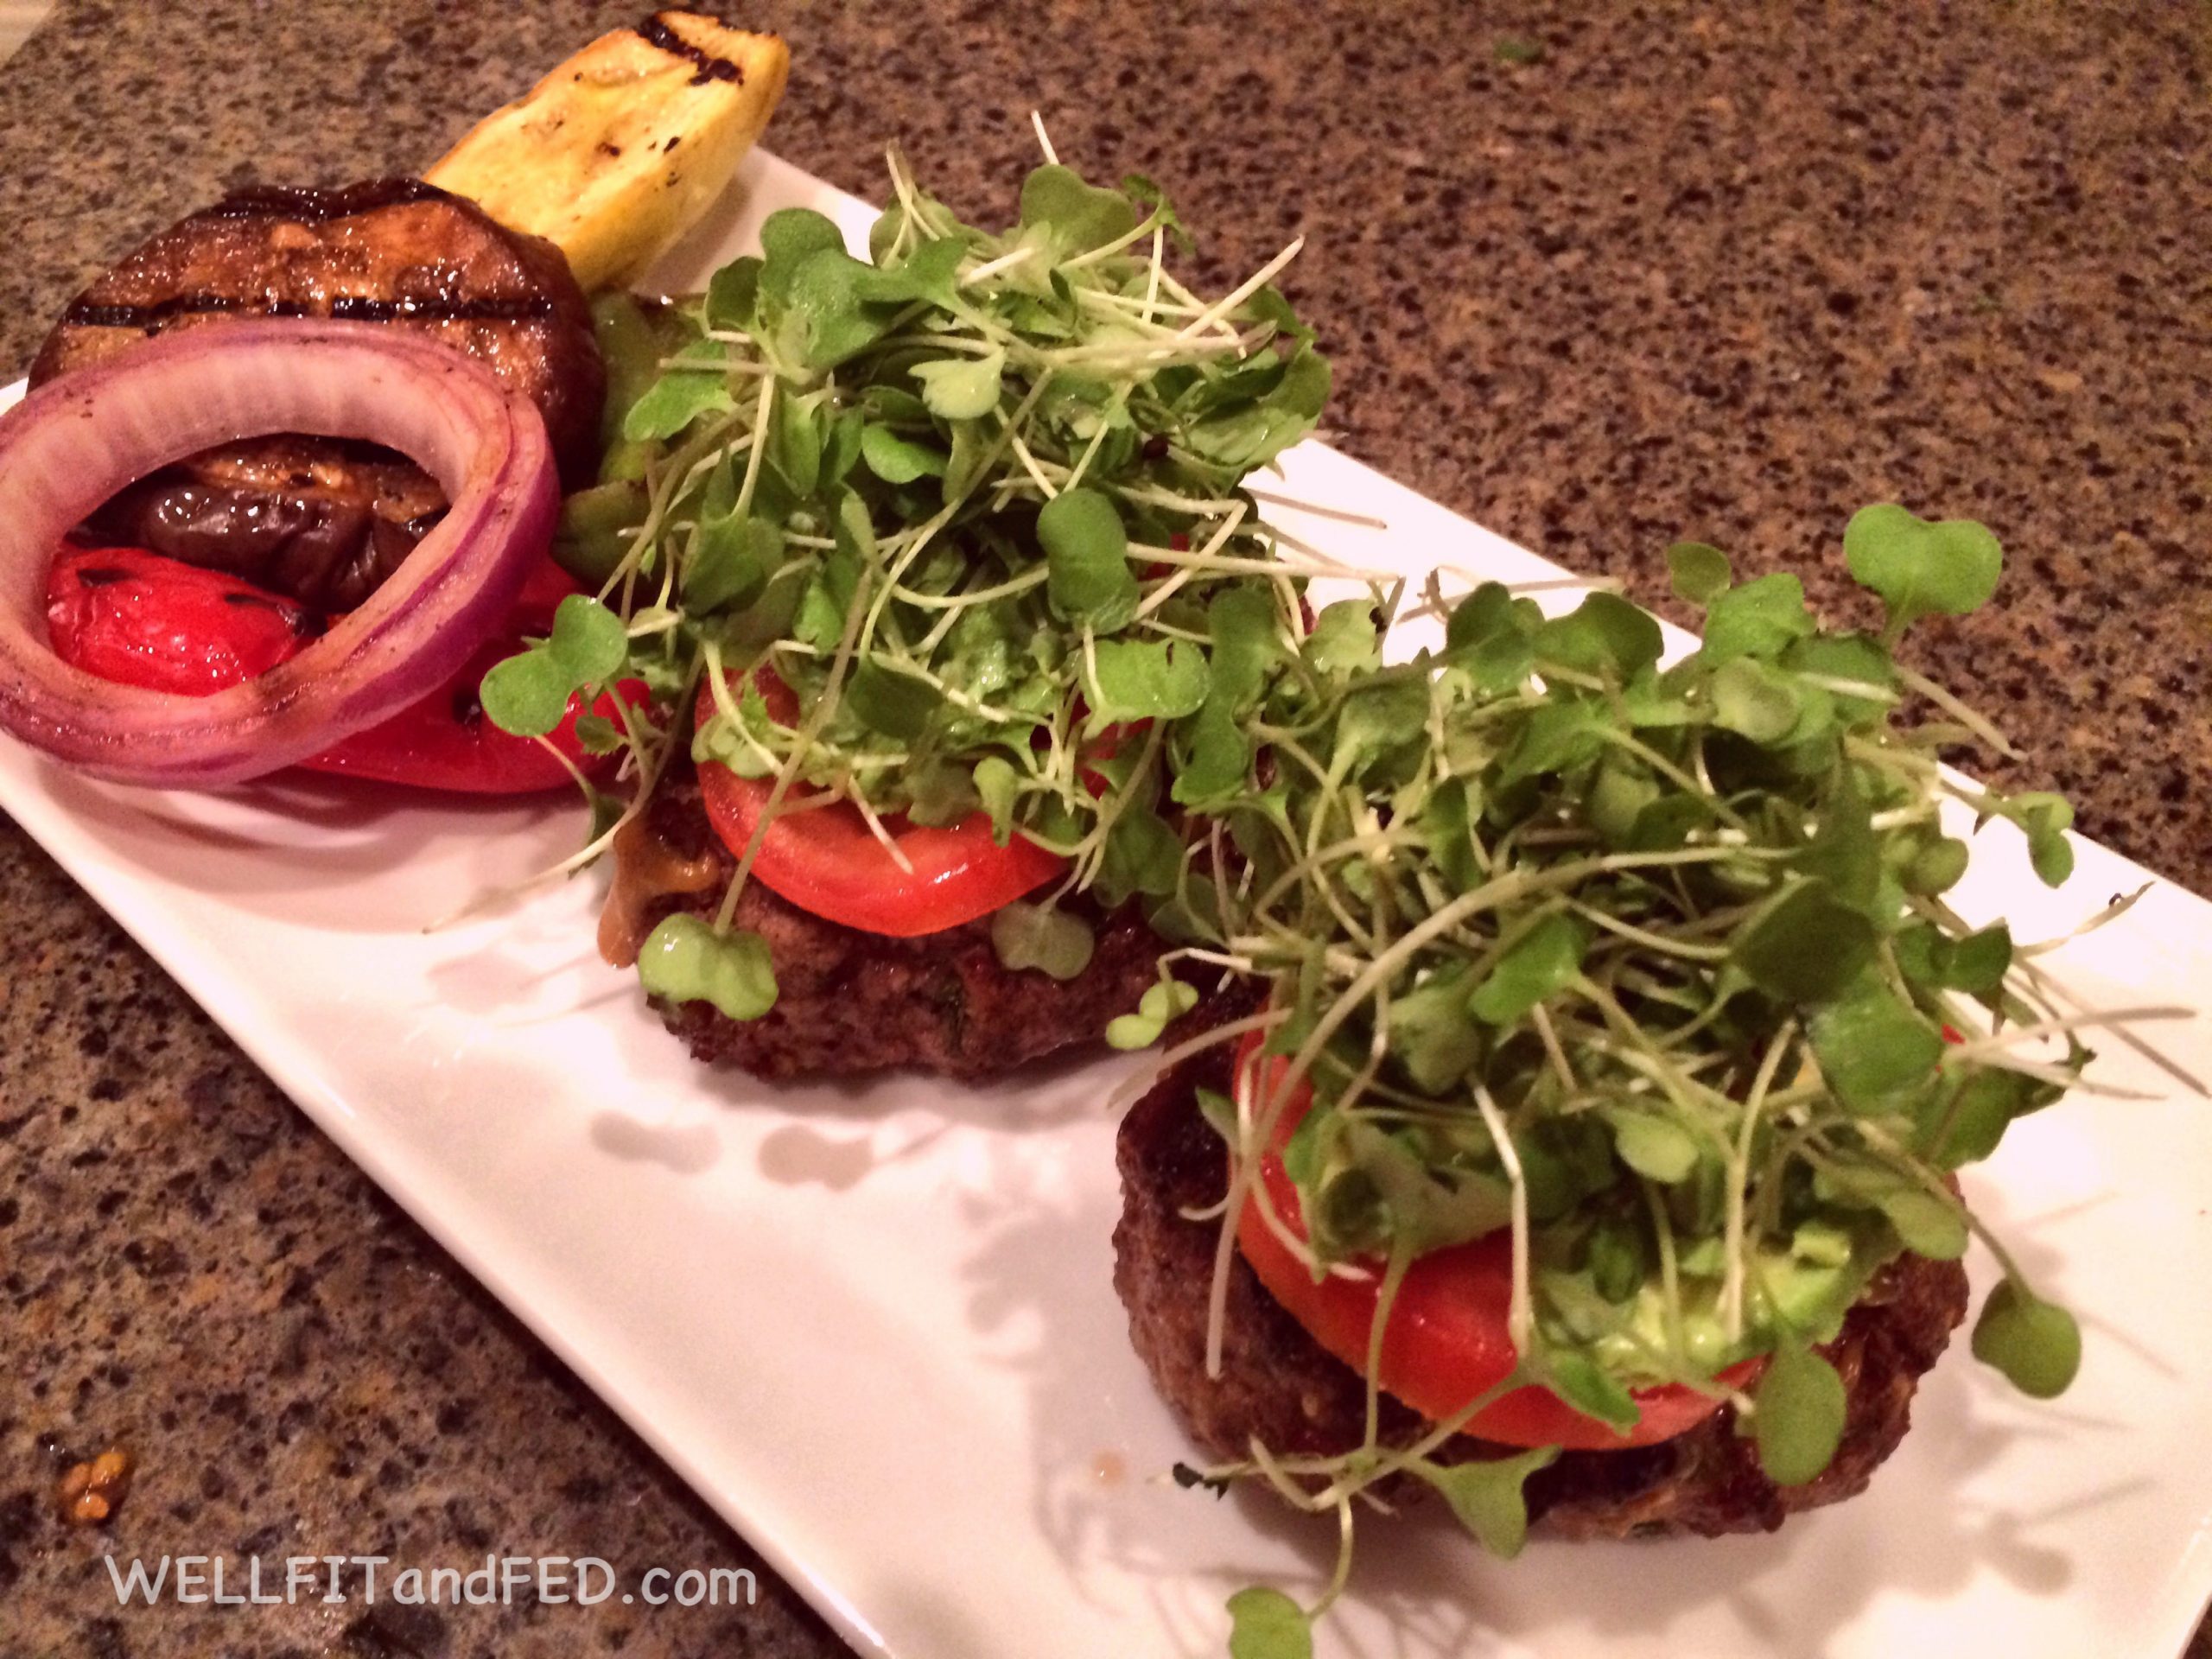 Paleo Bison Bacon Burgers: A Leaner, Healthier Way To Eat Burgers!WELLFITandFED